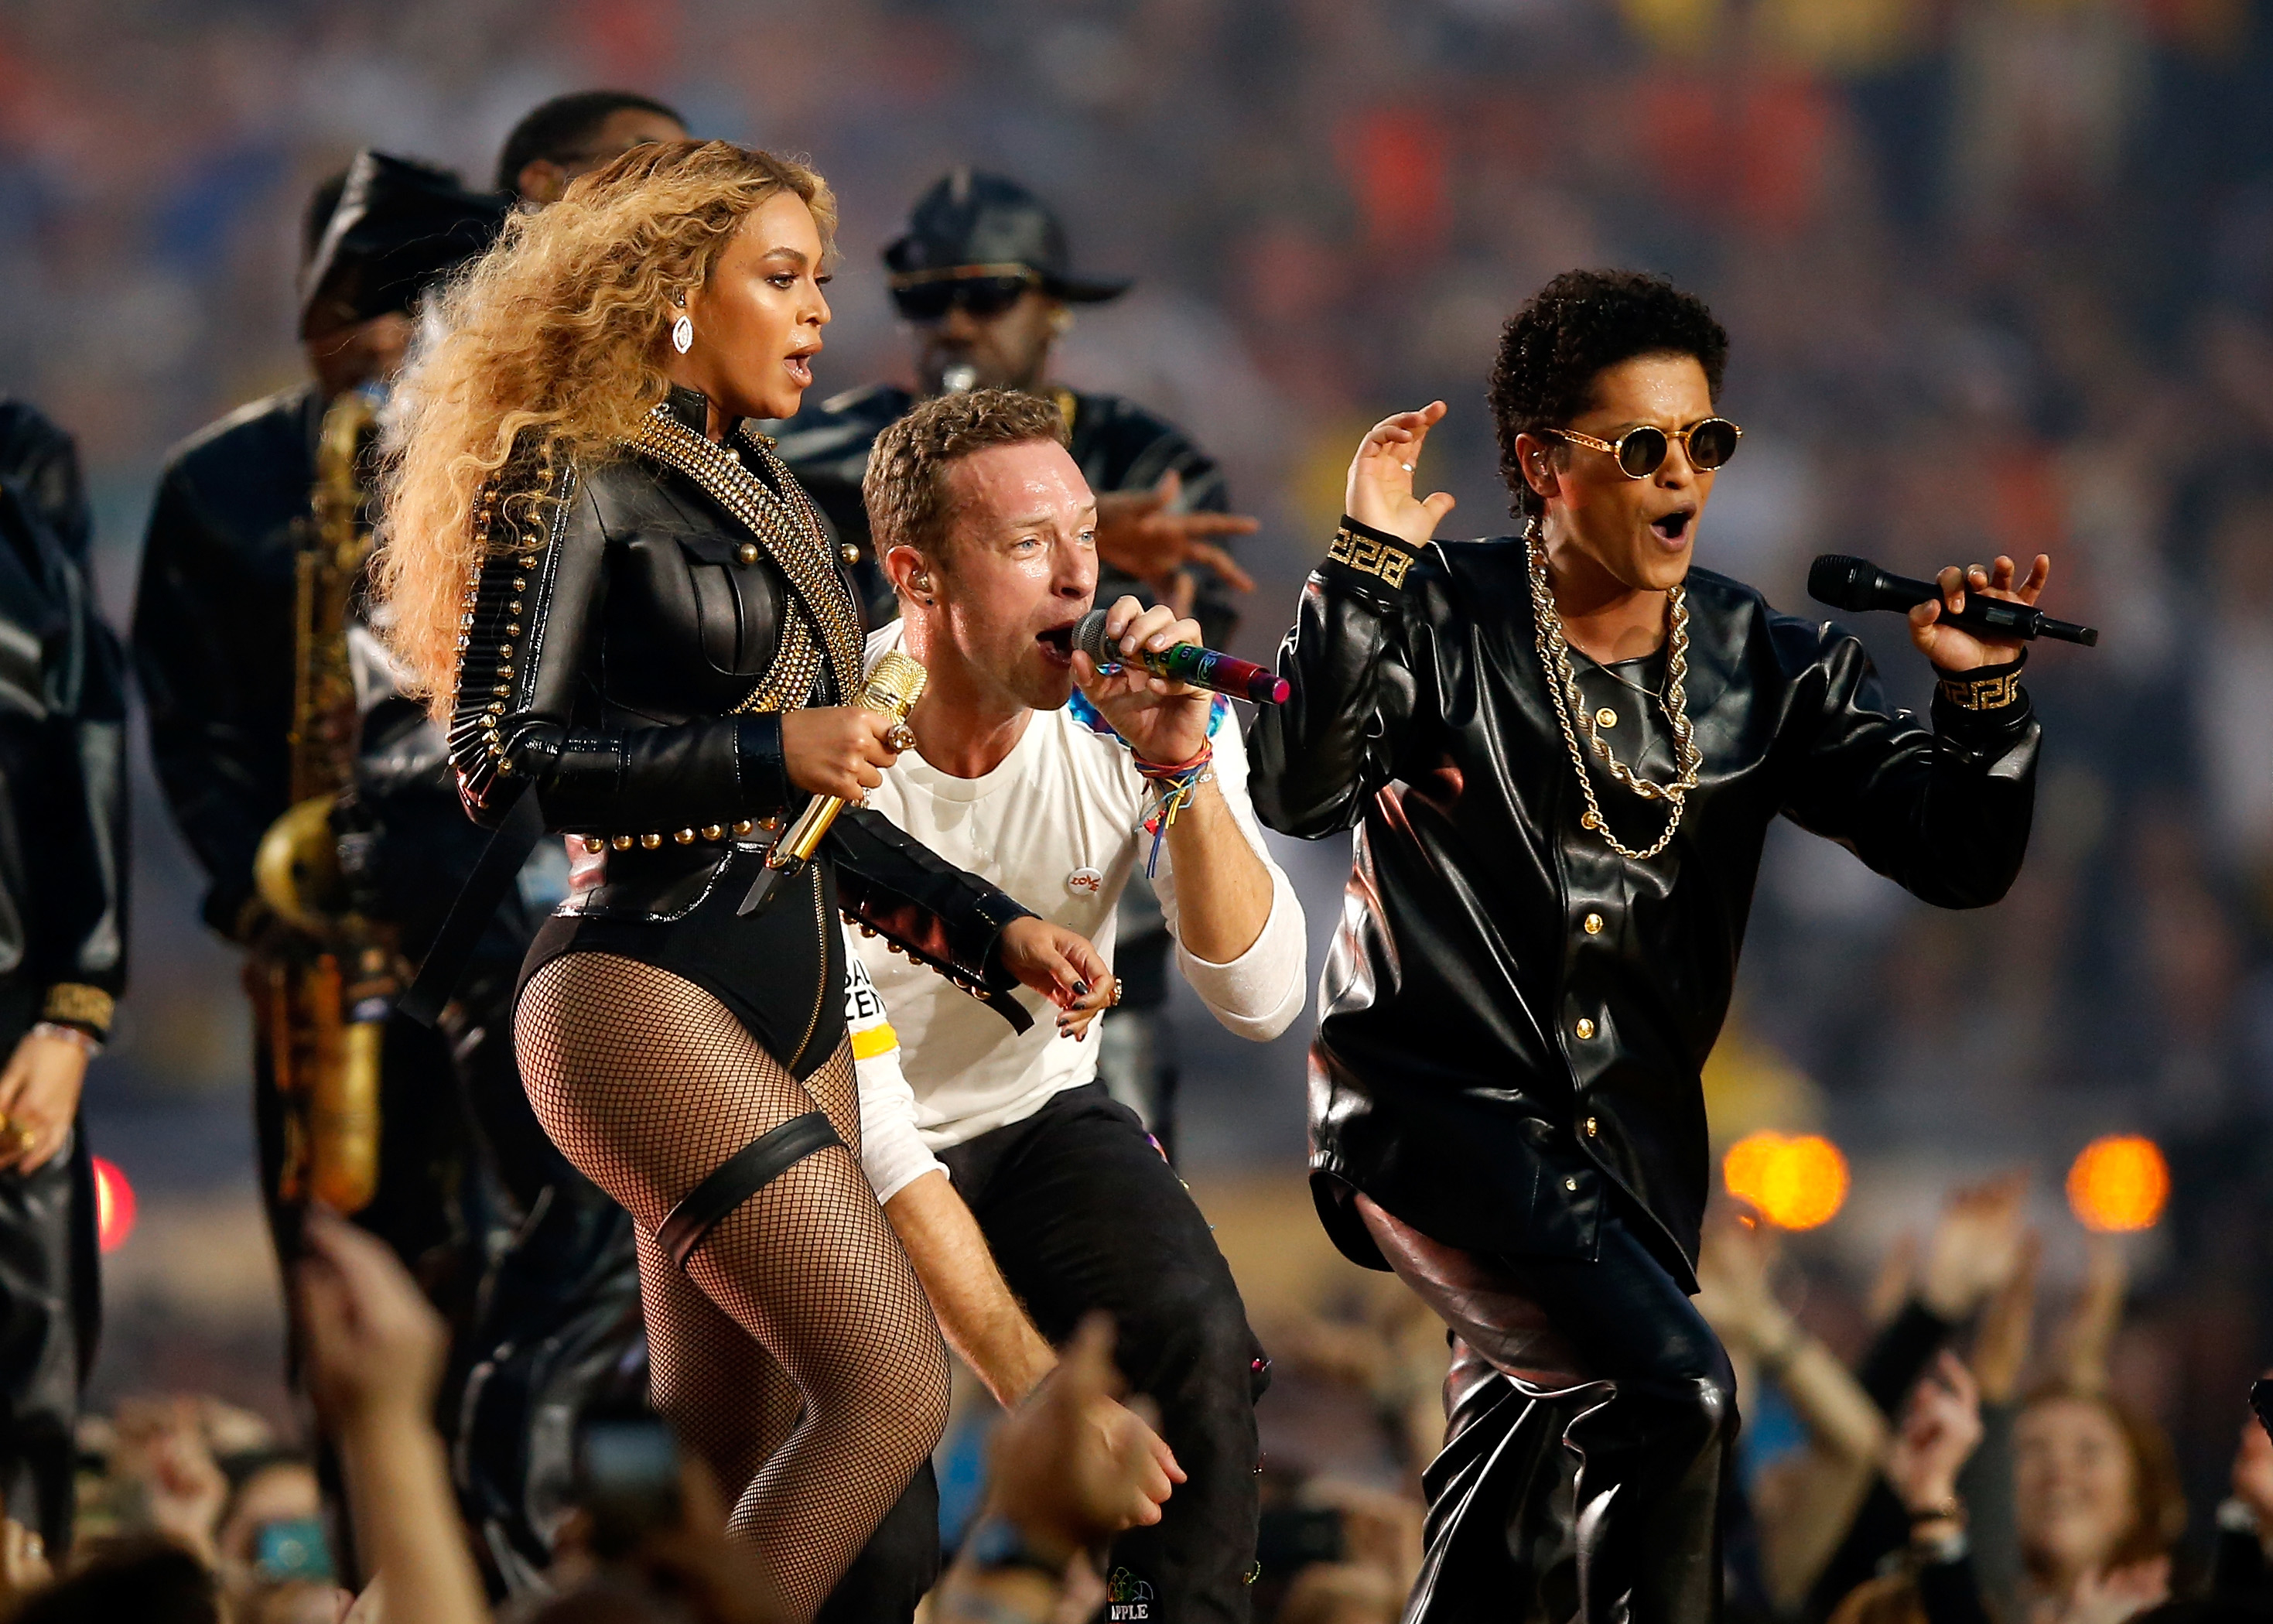 Beyoncé, Chris Martin, and Bruno Mars onstage at the Super Bowl